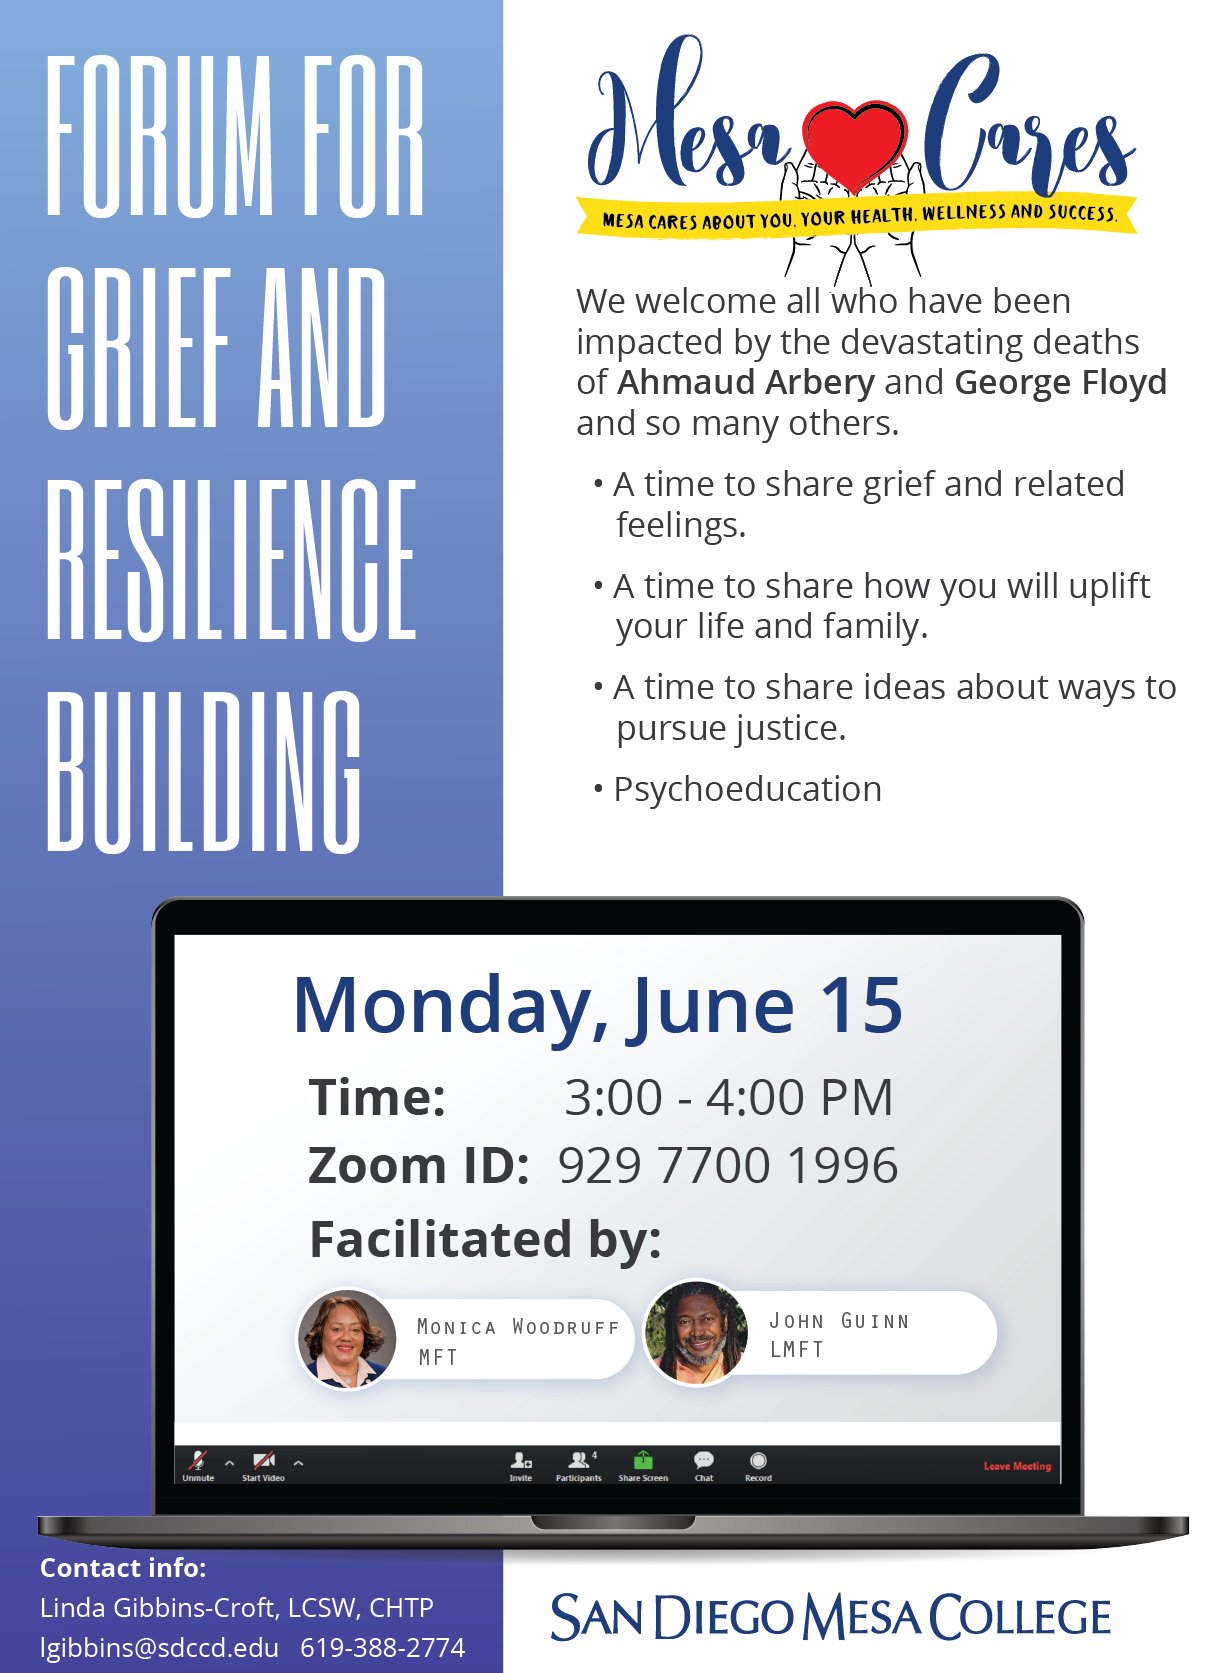 Forum for Grief and Resilience Building